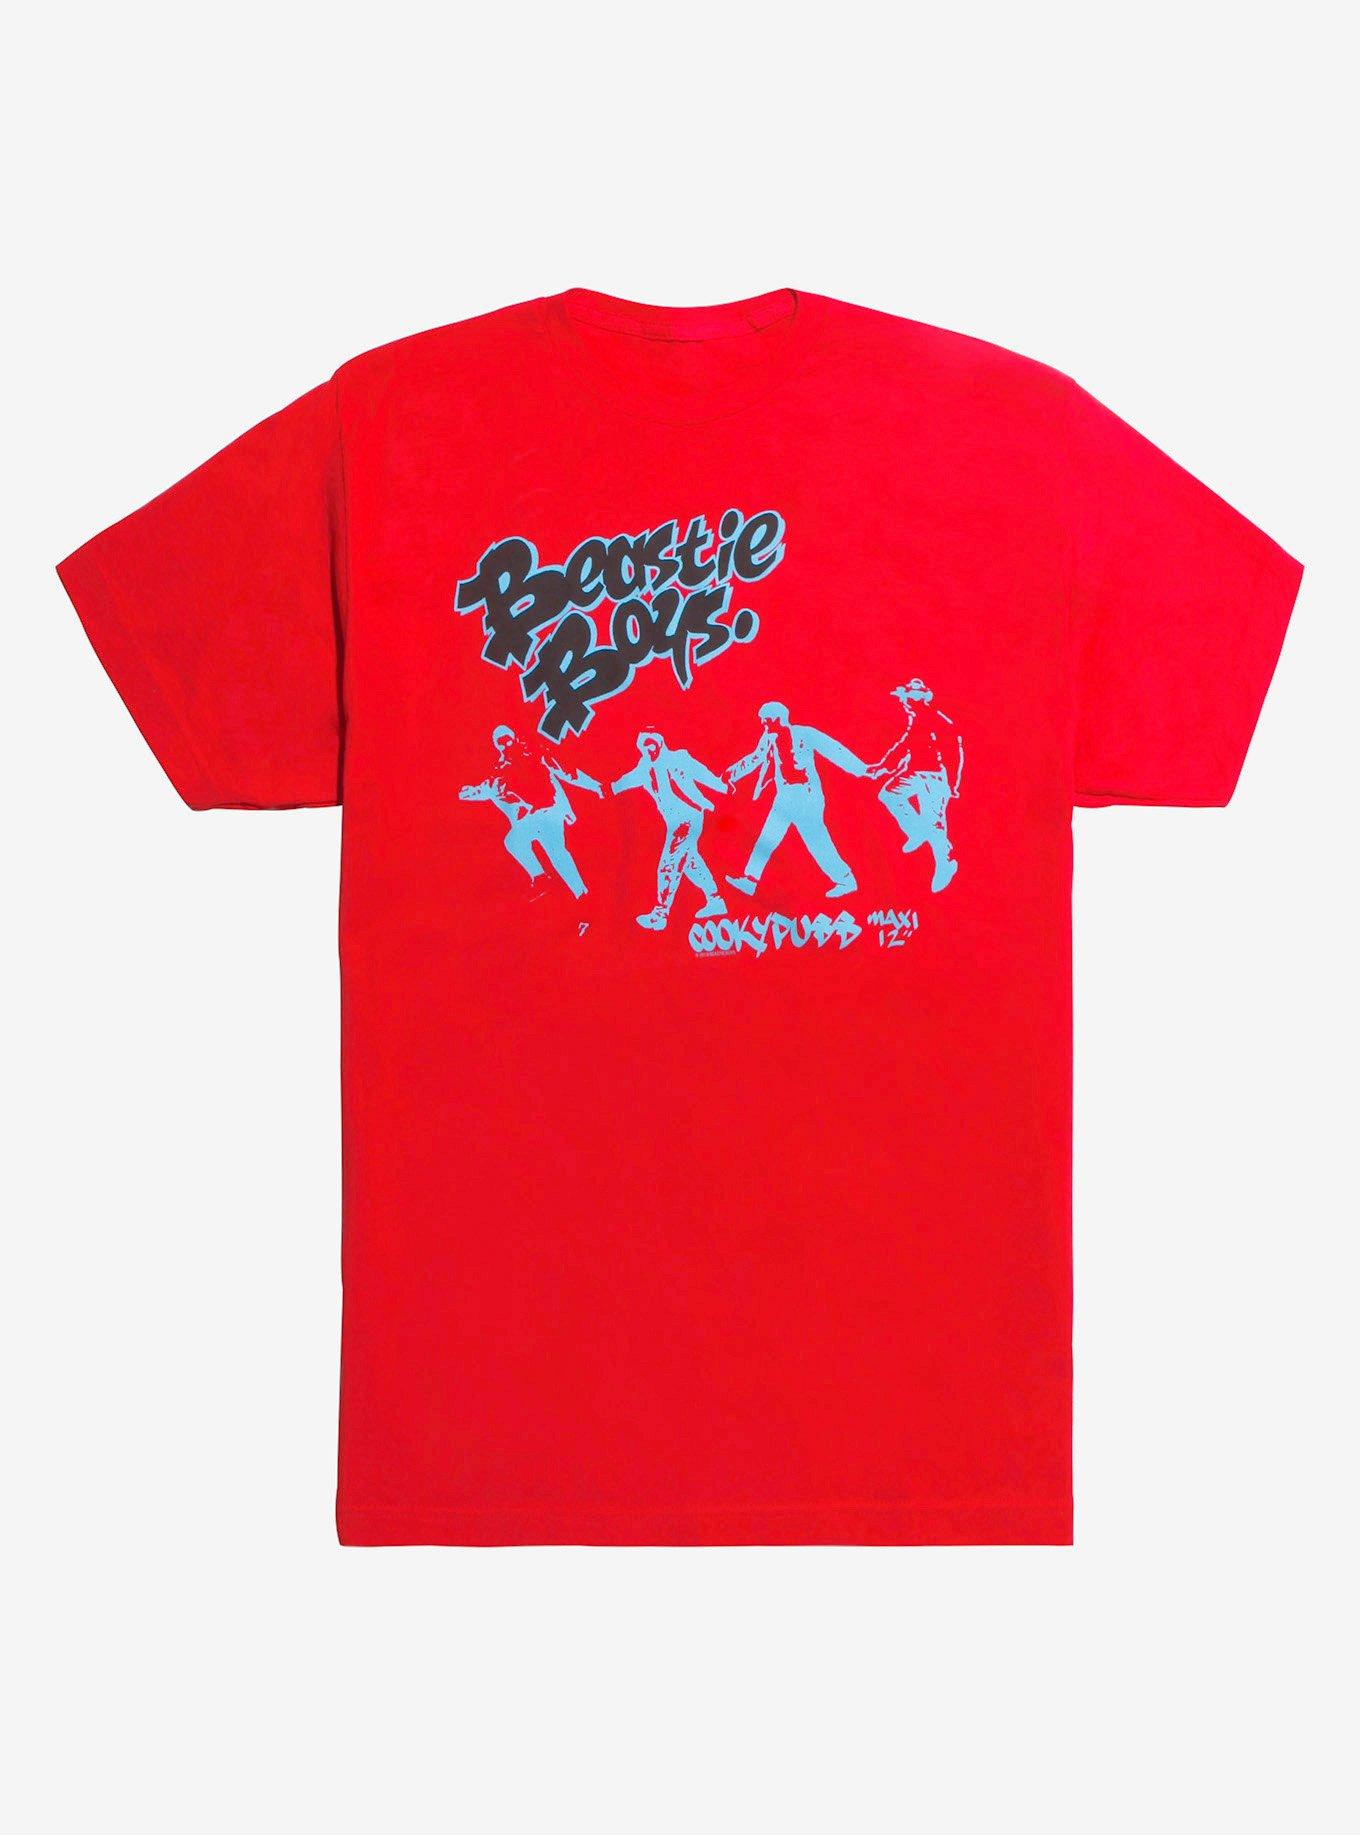 Beastie Boys Cooky Puss T-Shirt, RED, hi-res